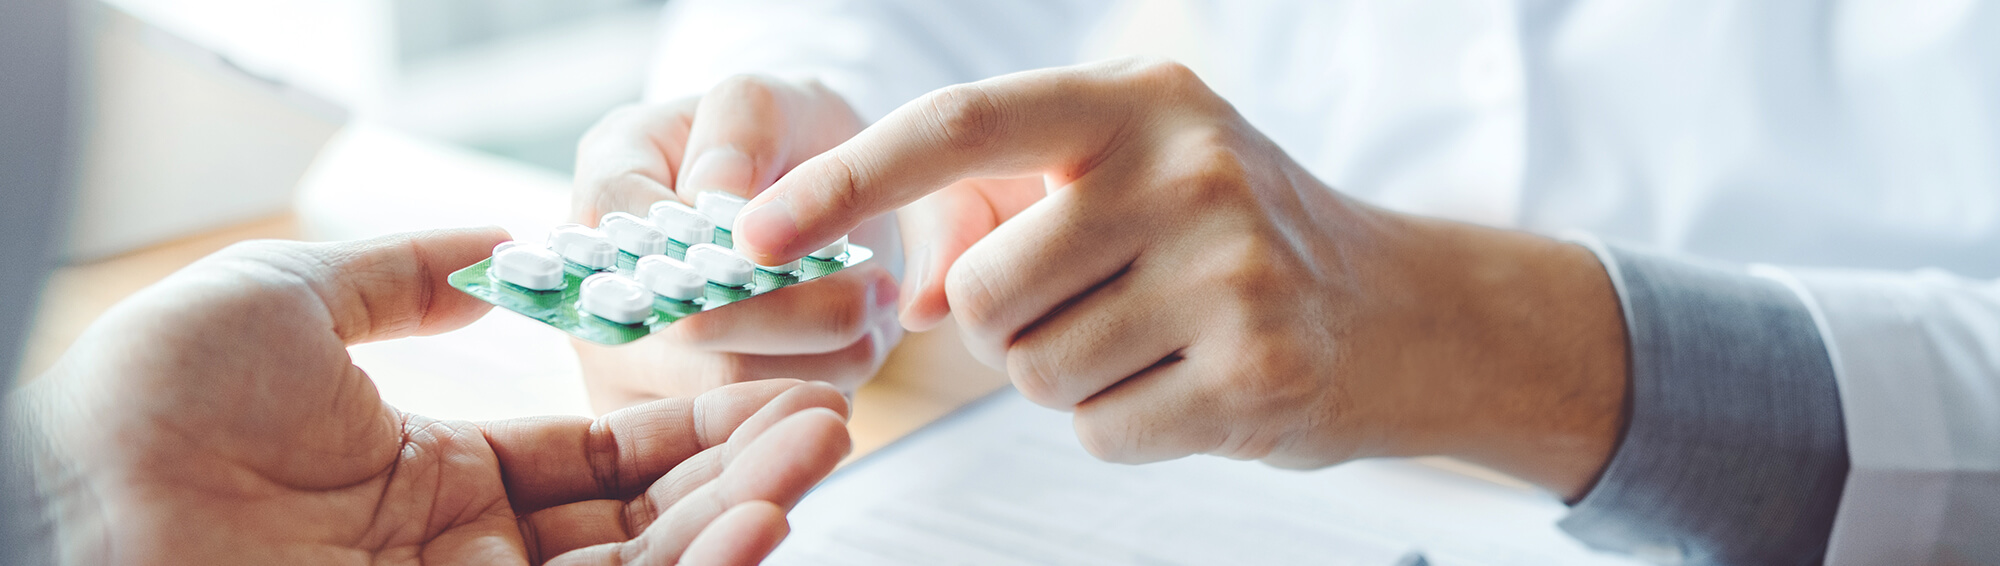 Diabetes Drugs Linked to Serious Health Problems